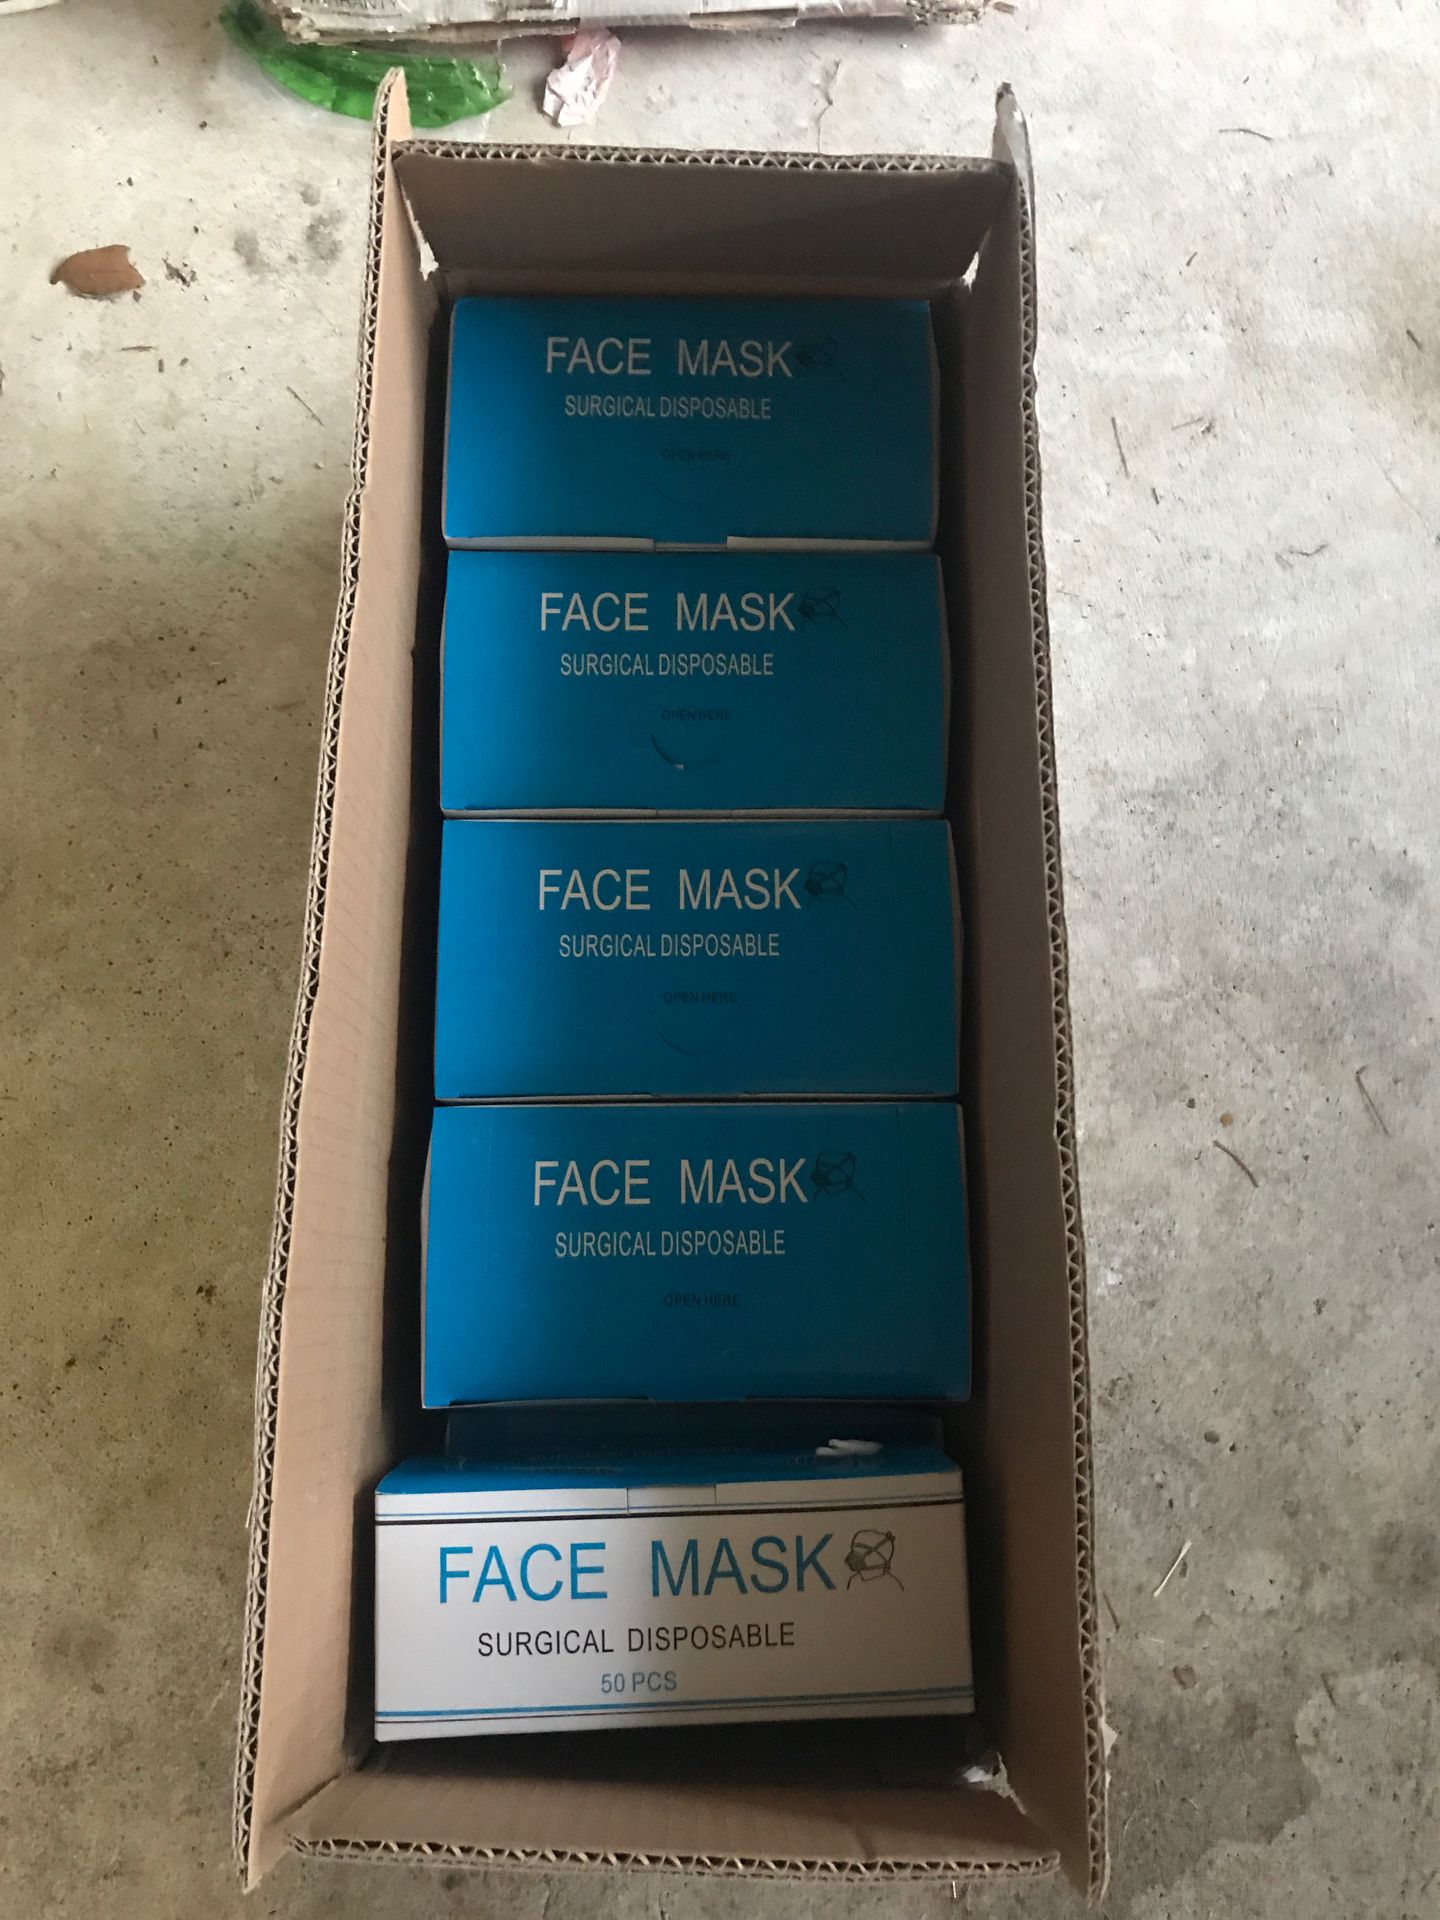 Face mask surgical disposable